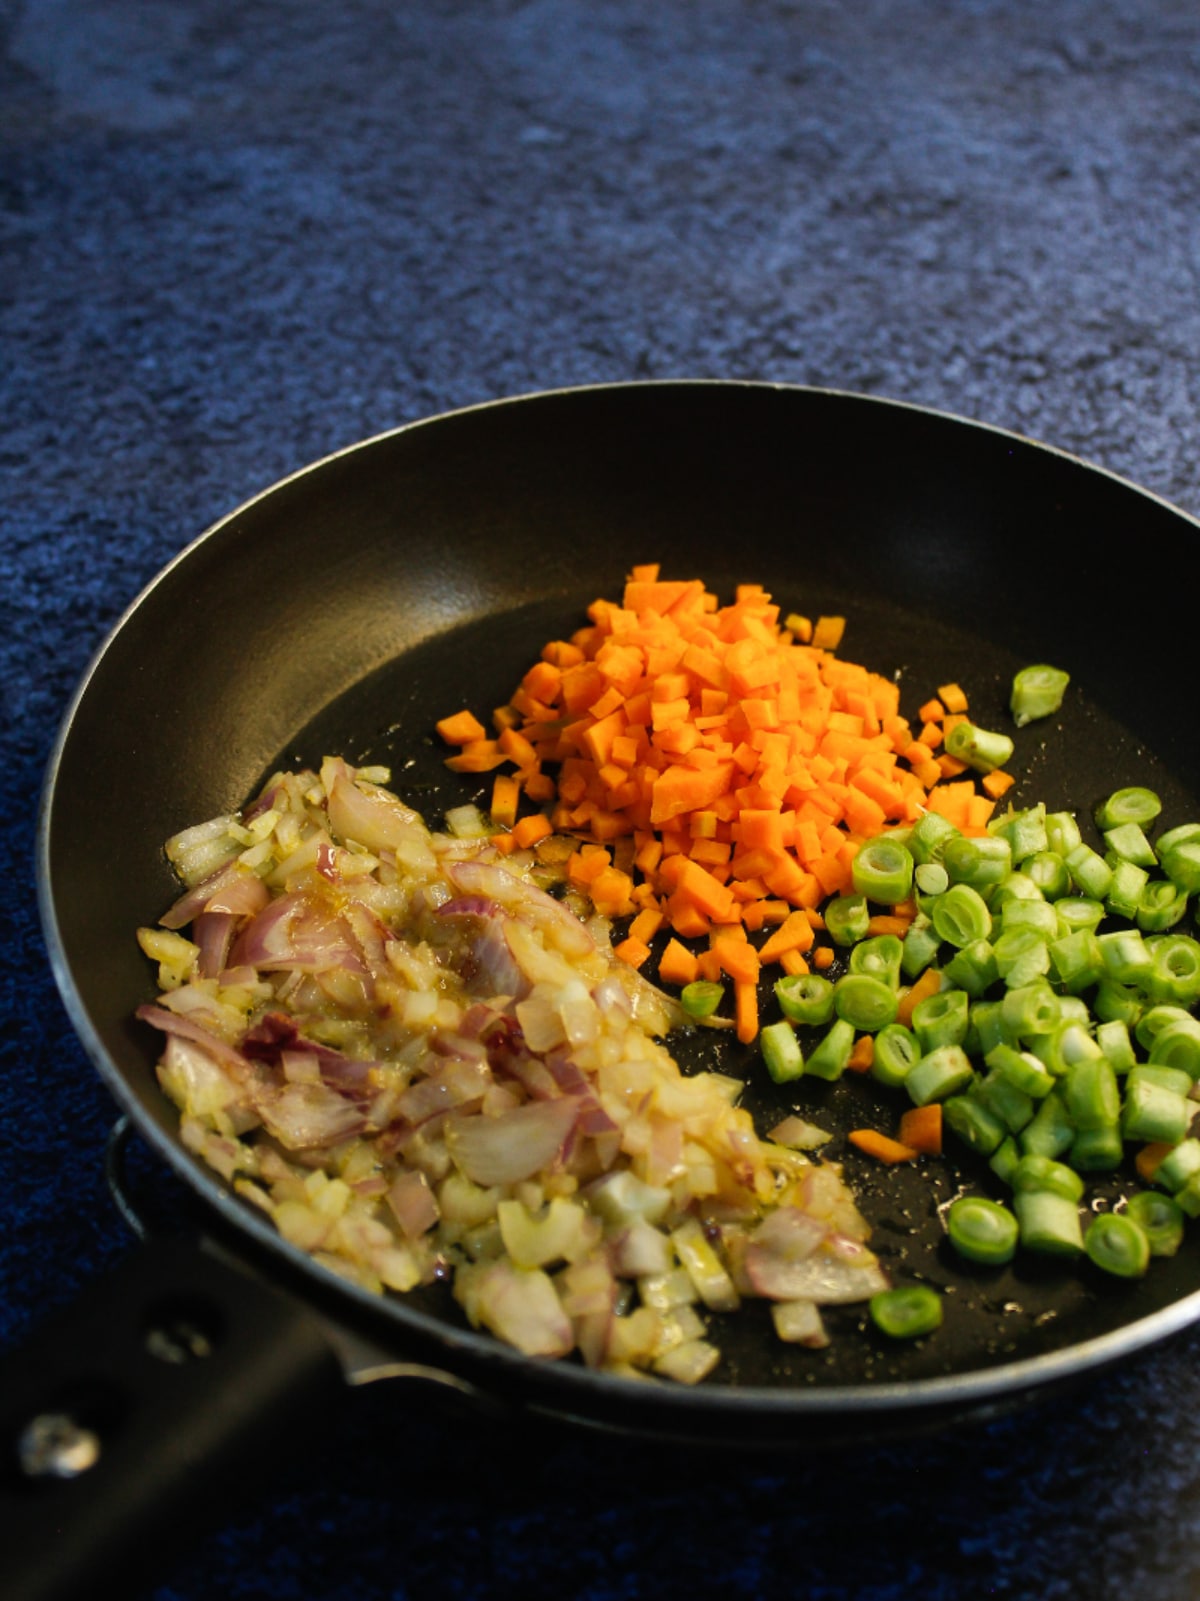 Add chopped carrots and peas to the pan and saute